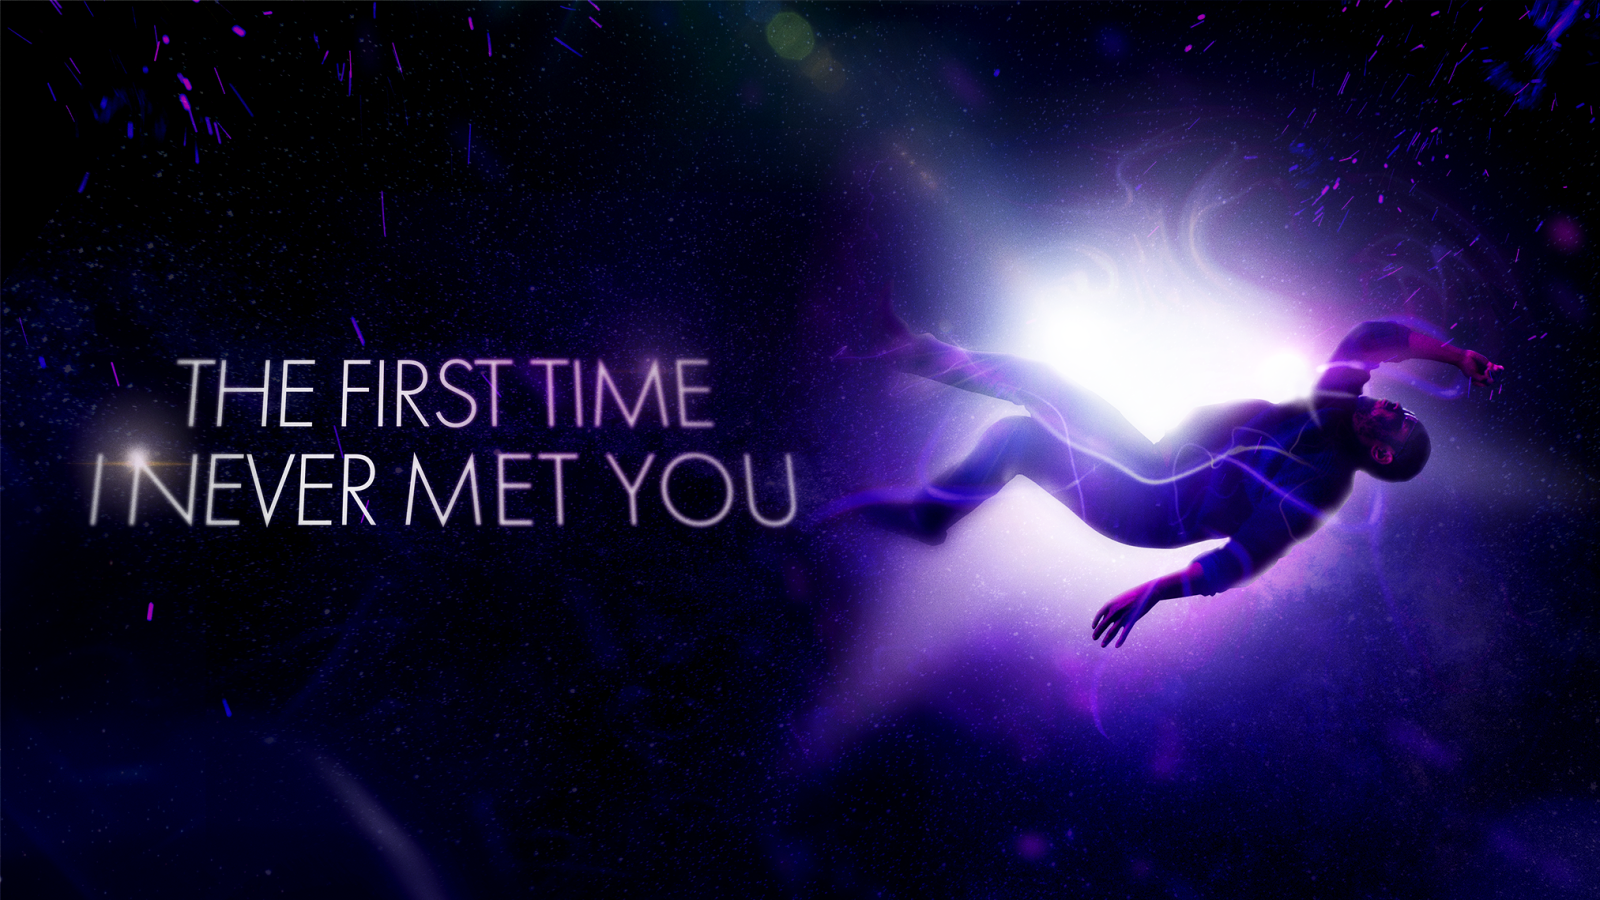 Eric Kole - The First Time I Never Met You 